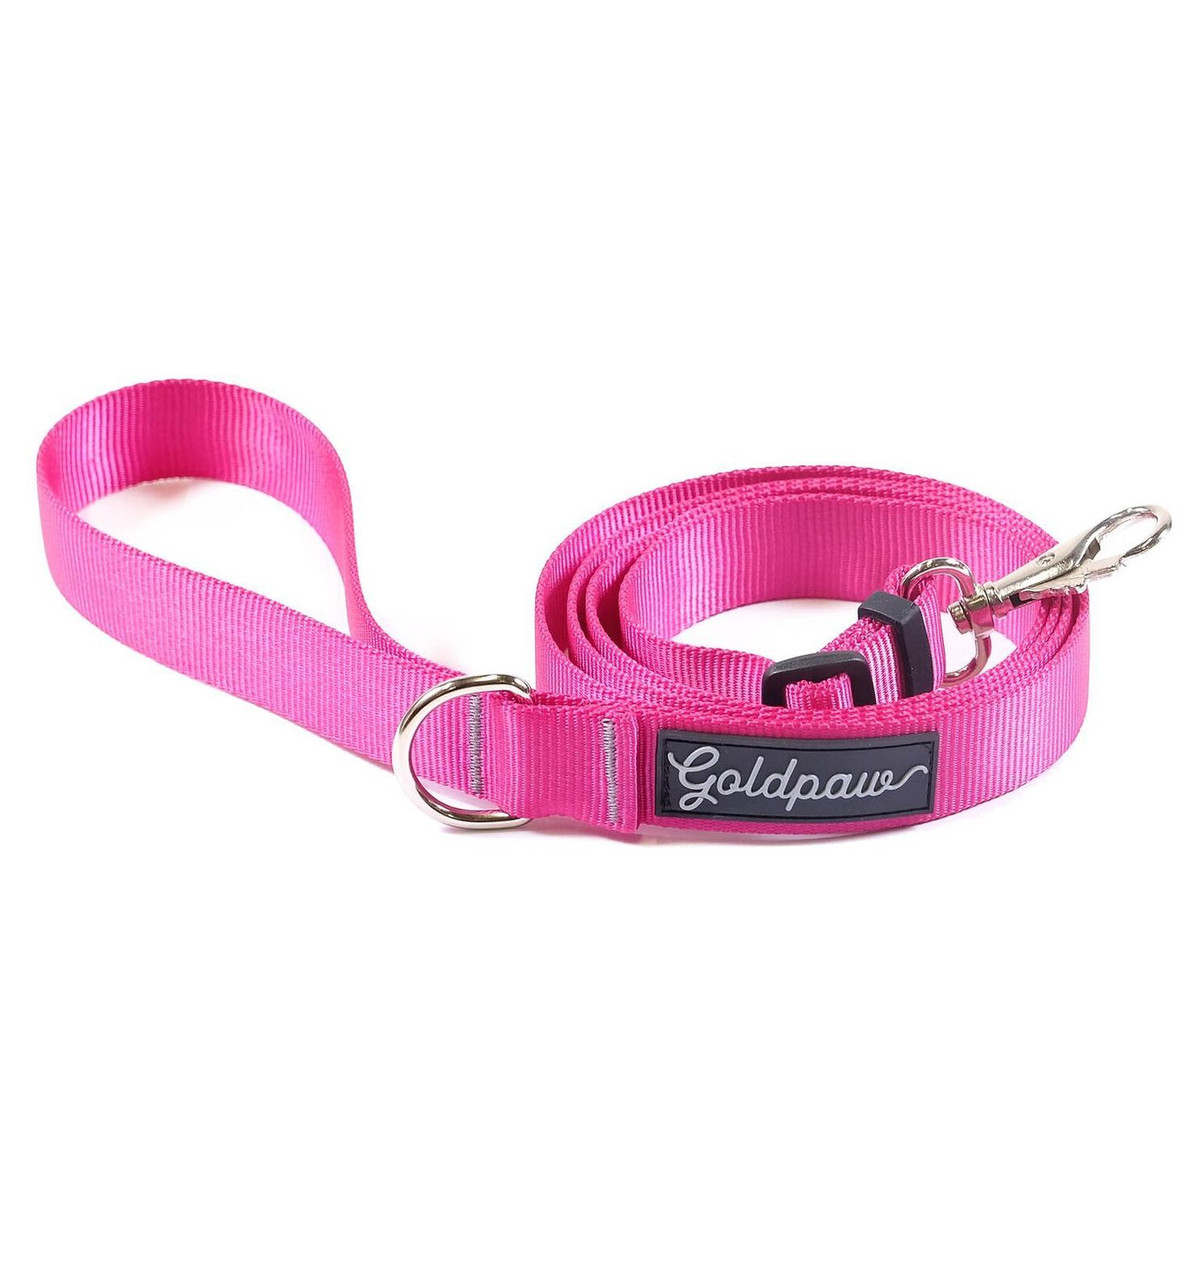 PitchDog Safe and Durable Fetch Ring for Dogs (Pink, 11 inches)